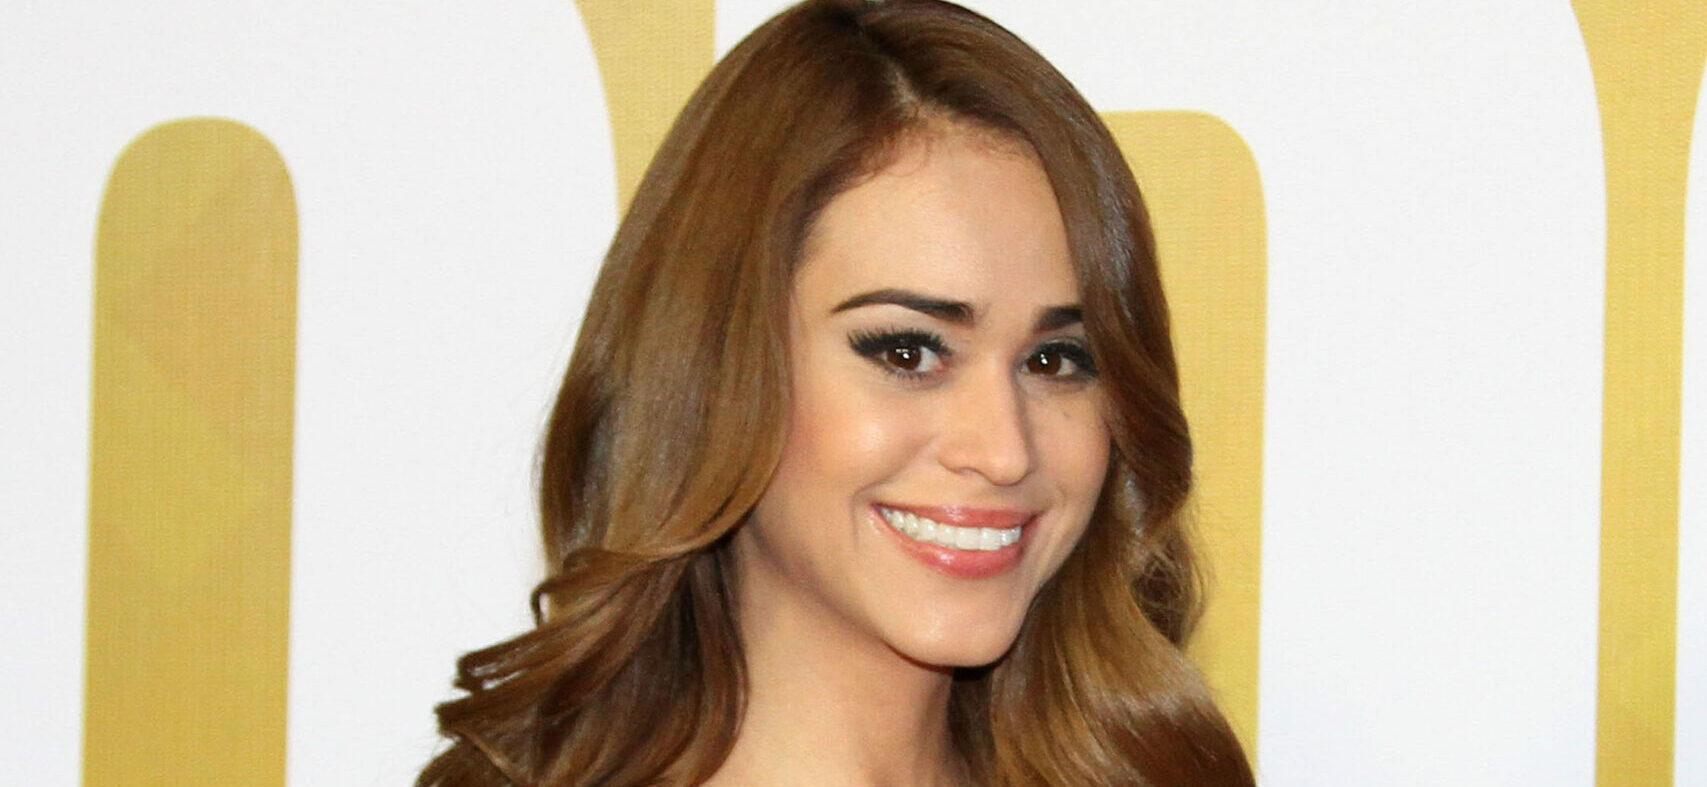 ‘Mexican Weather Girl’ Yanet Garcia In Pink Swimsuit Shows Her Rear